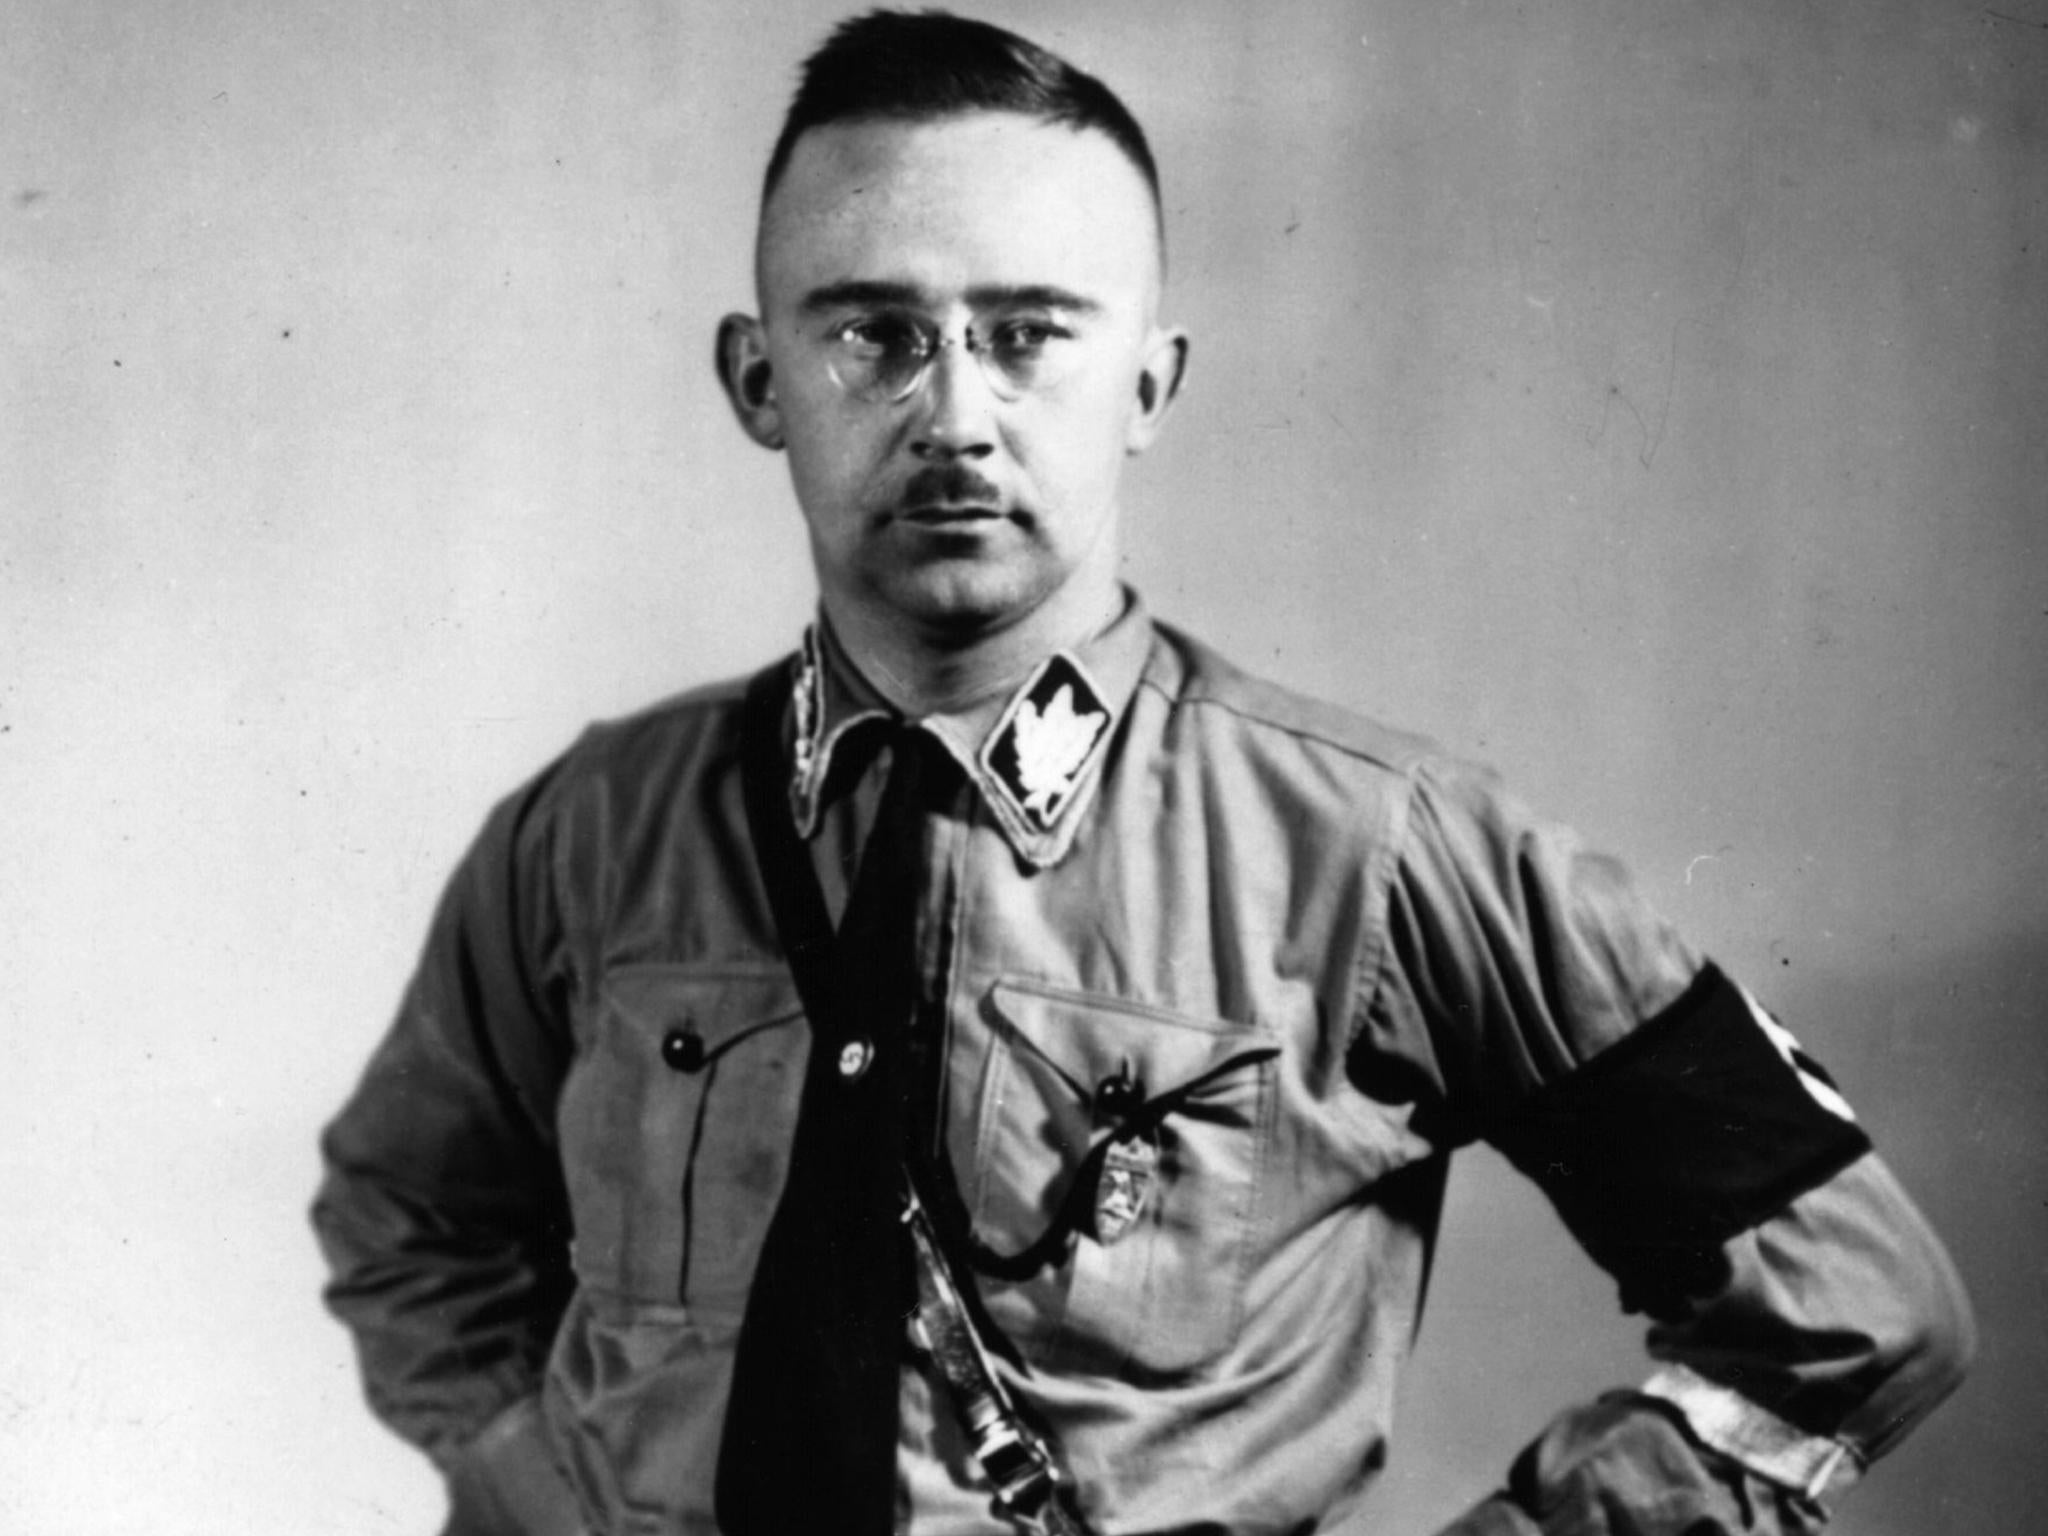 After being captured at the end of the Second World War, Heinrich Himmler?killed himself before he could be put on trial (Getty)